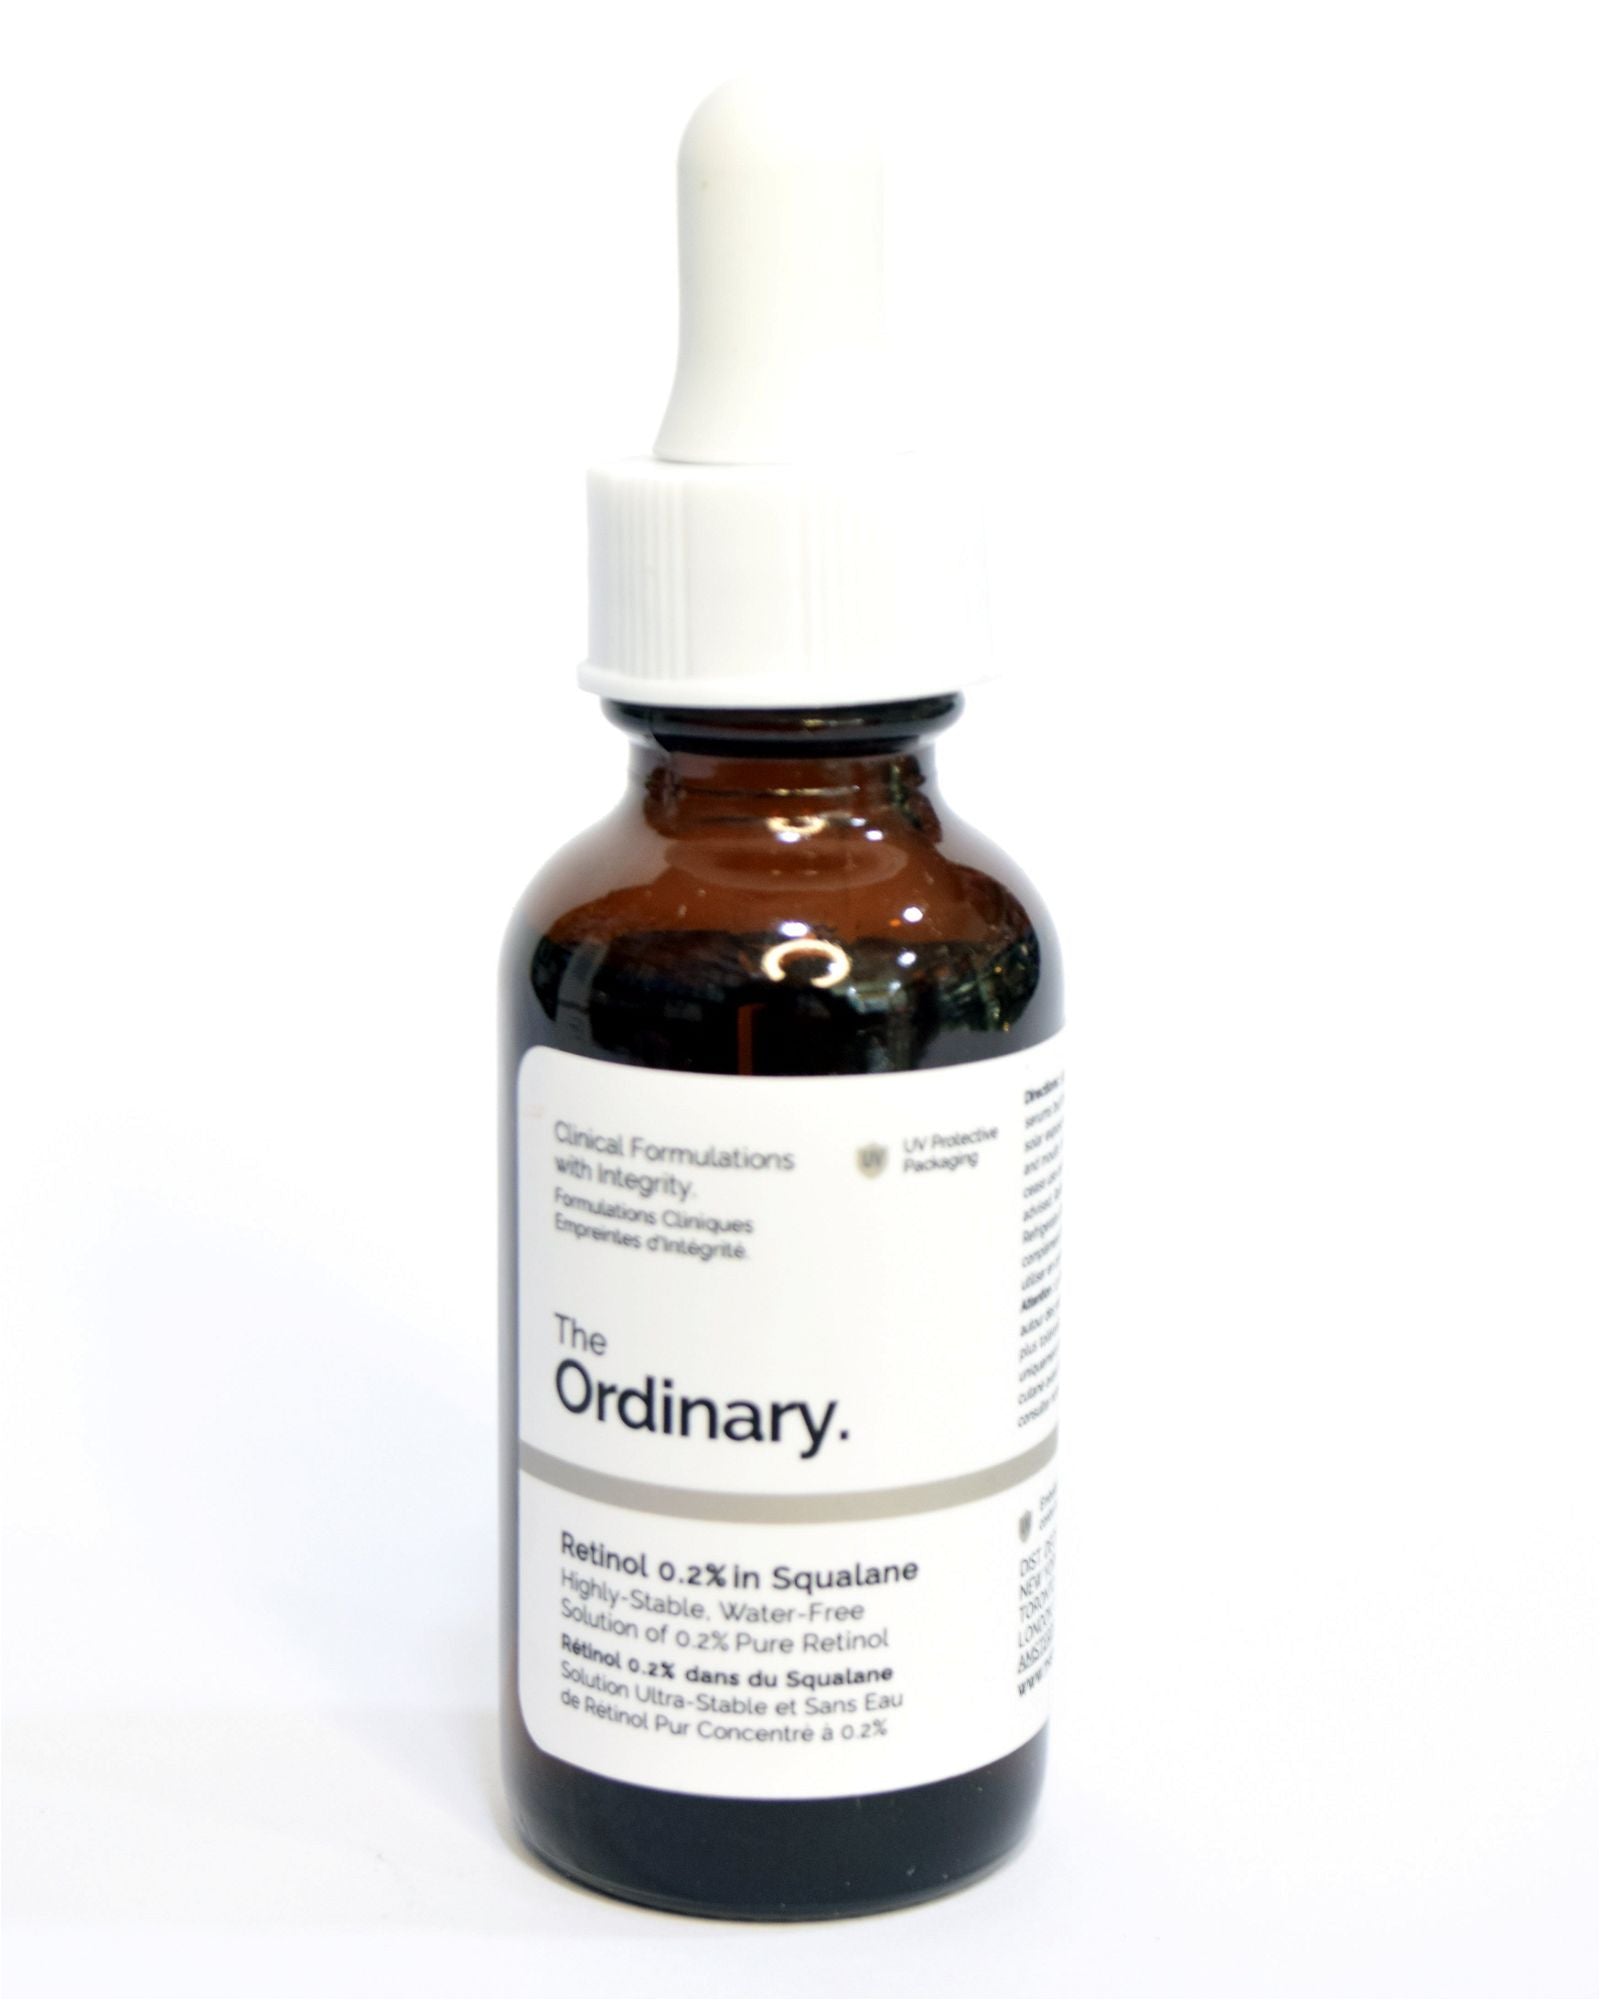 The Ordinary Retional 0.2% In Squalane 30Ml - Vitamins House